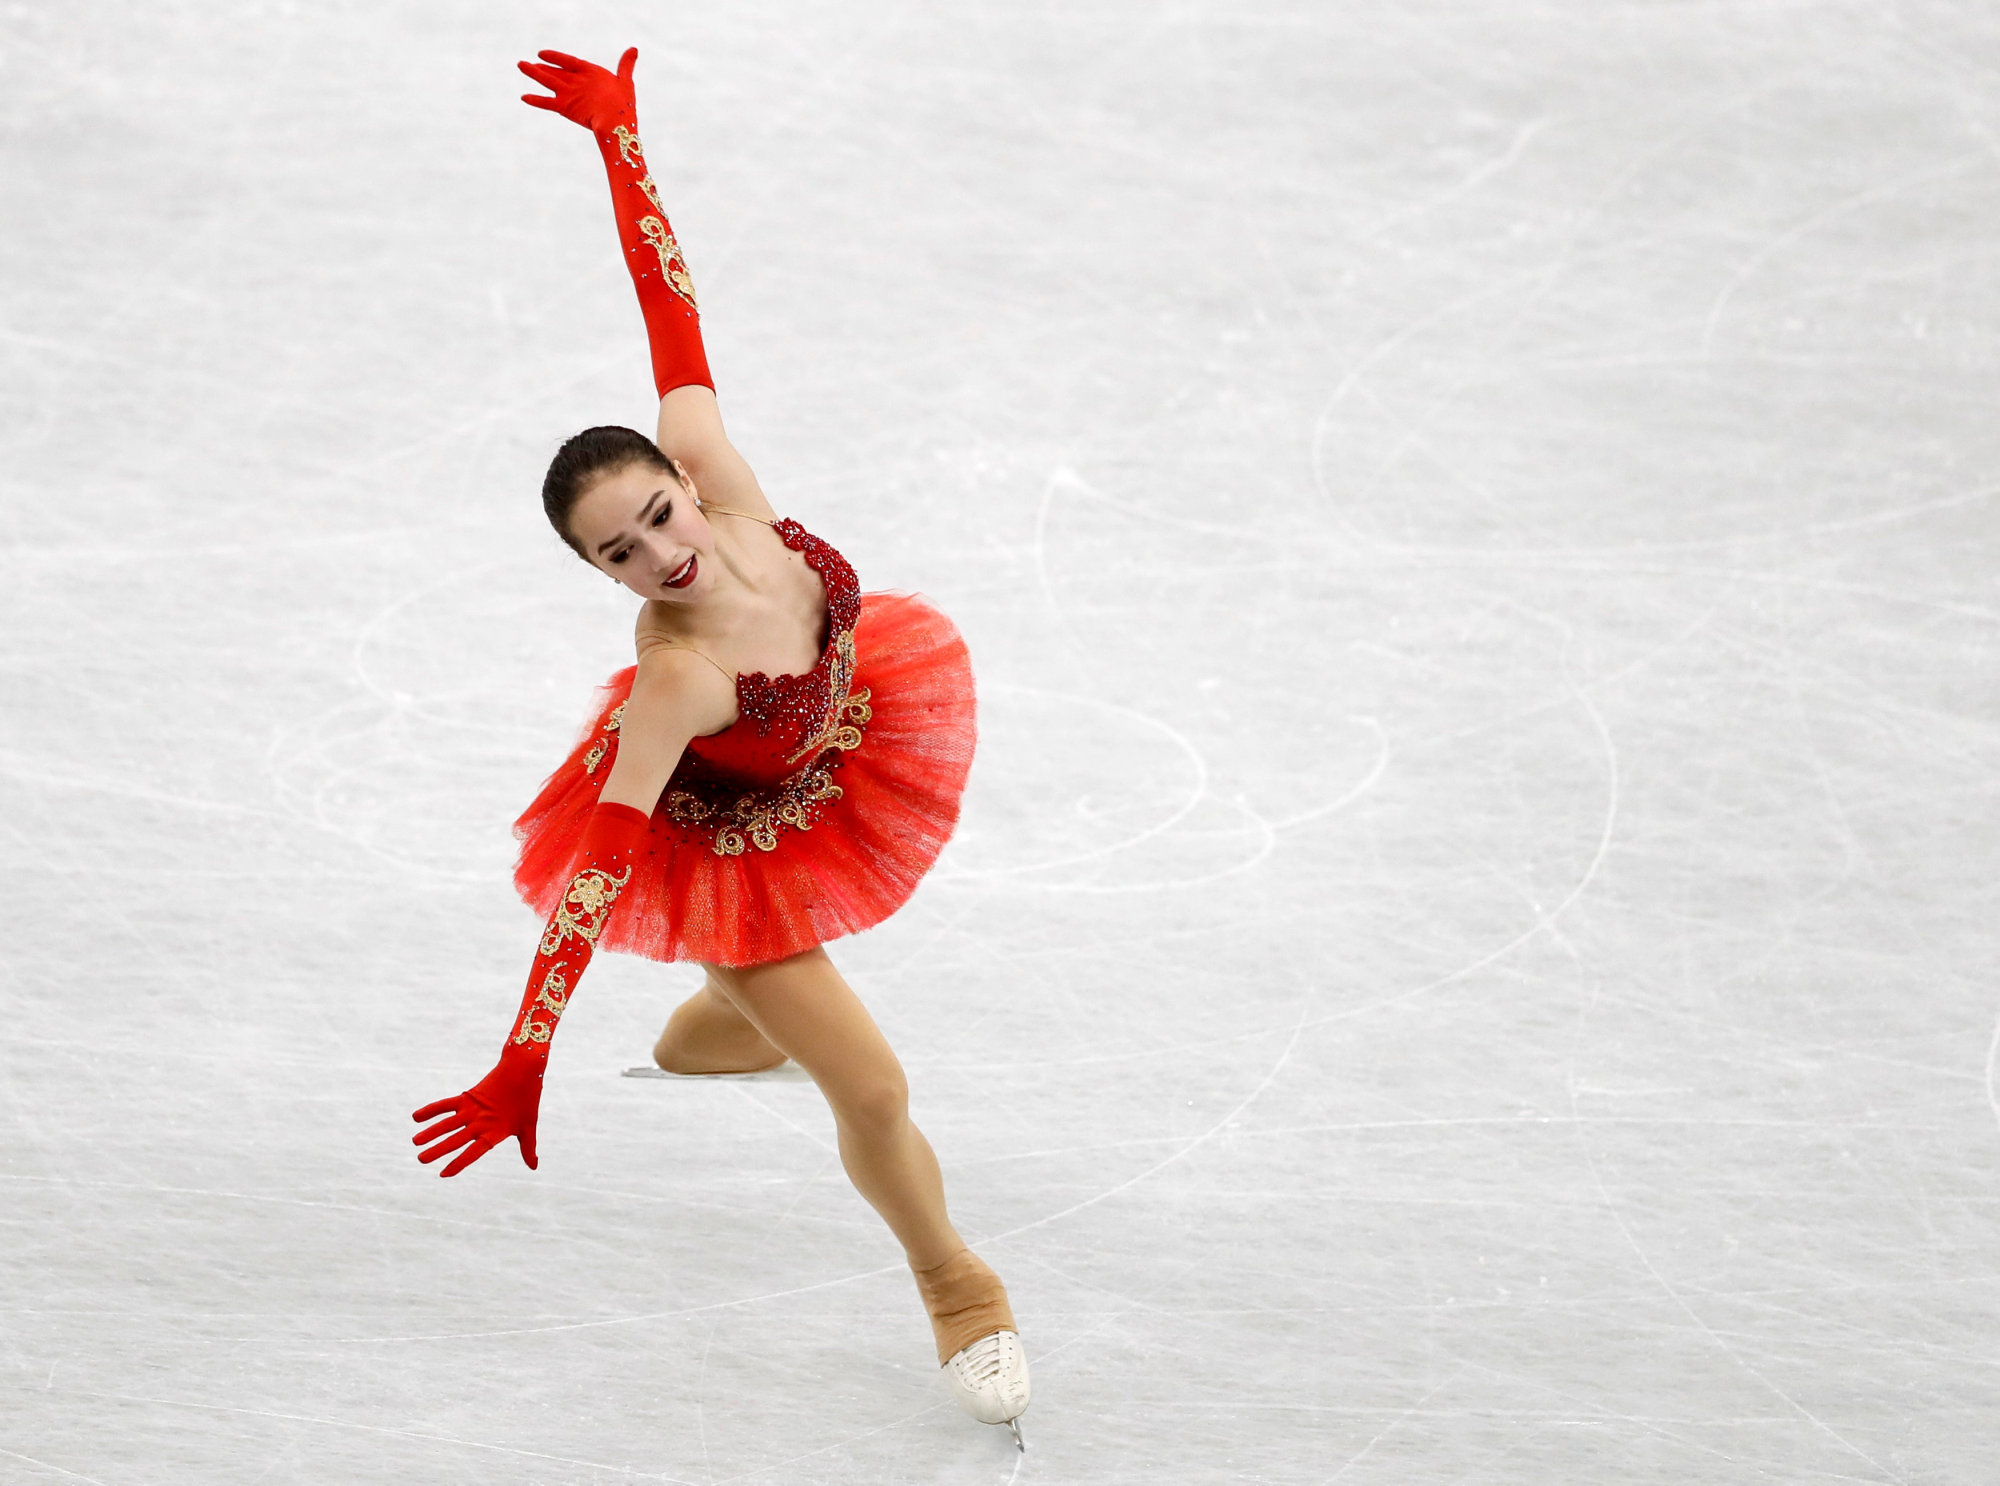 Russia's Alina Zagitova performs her free skate routine on Saturday at the Grand Prix Final in Nagoya. Zagitova finished first with 223.30 points. | REUTERS